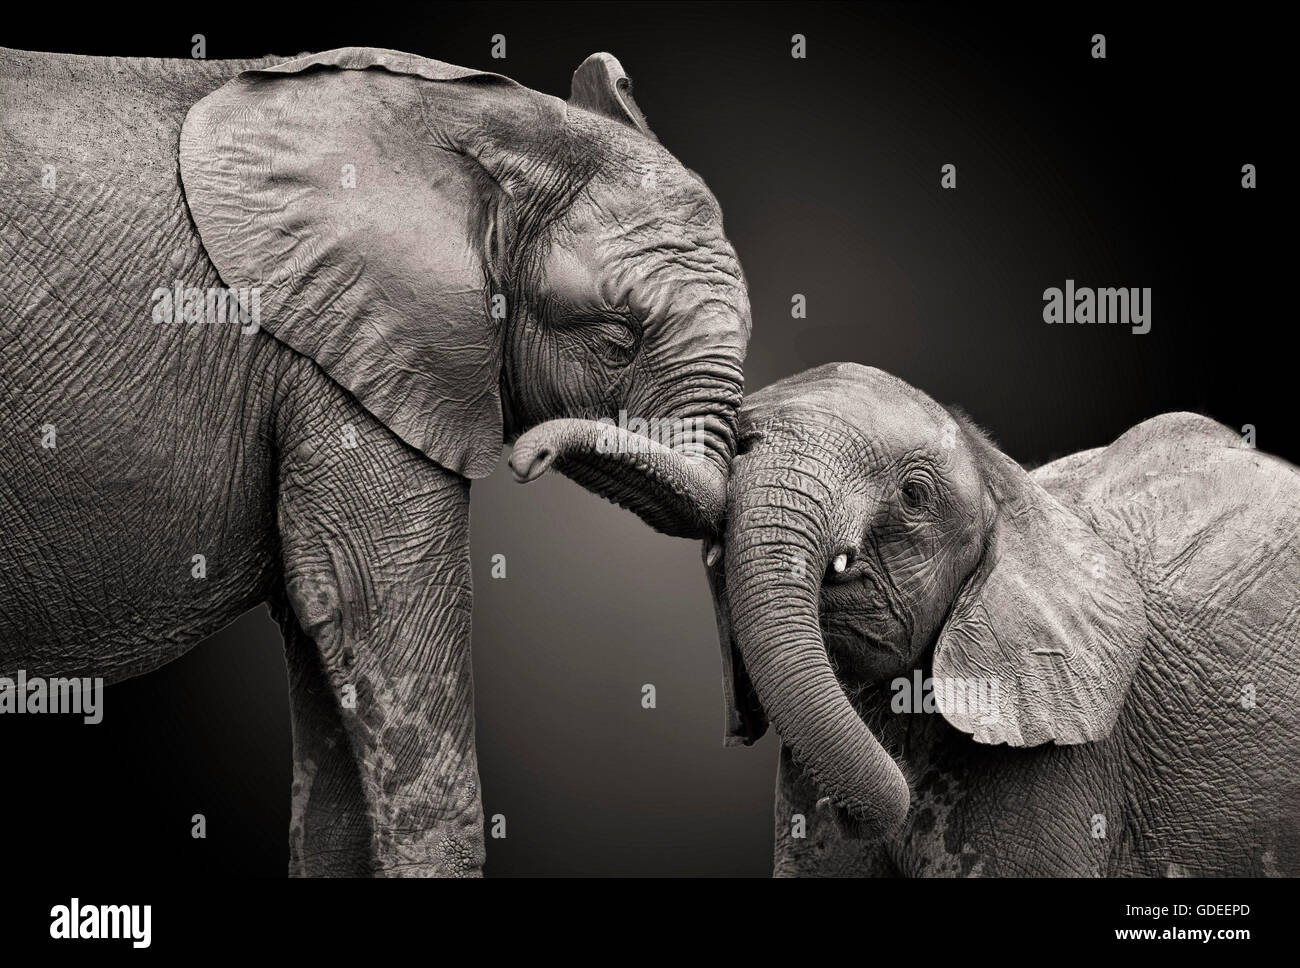 Couple of elephants in black and white colors. Stock Photo